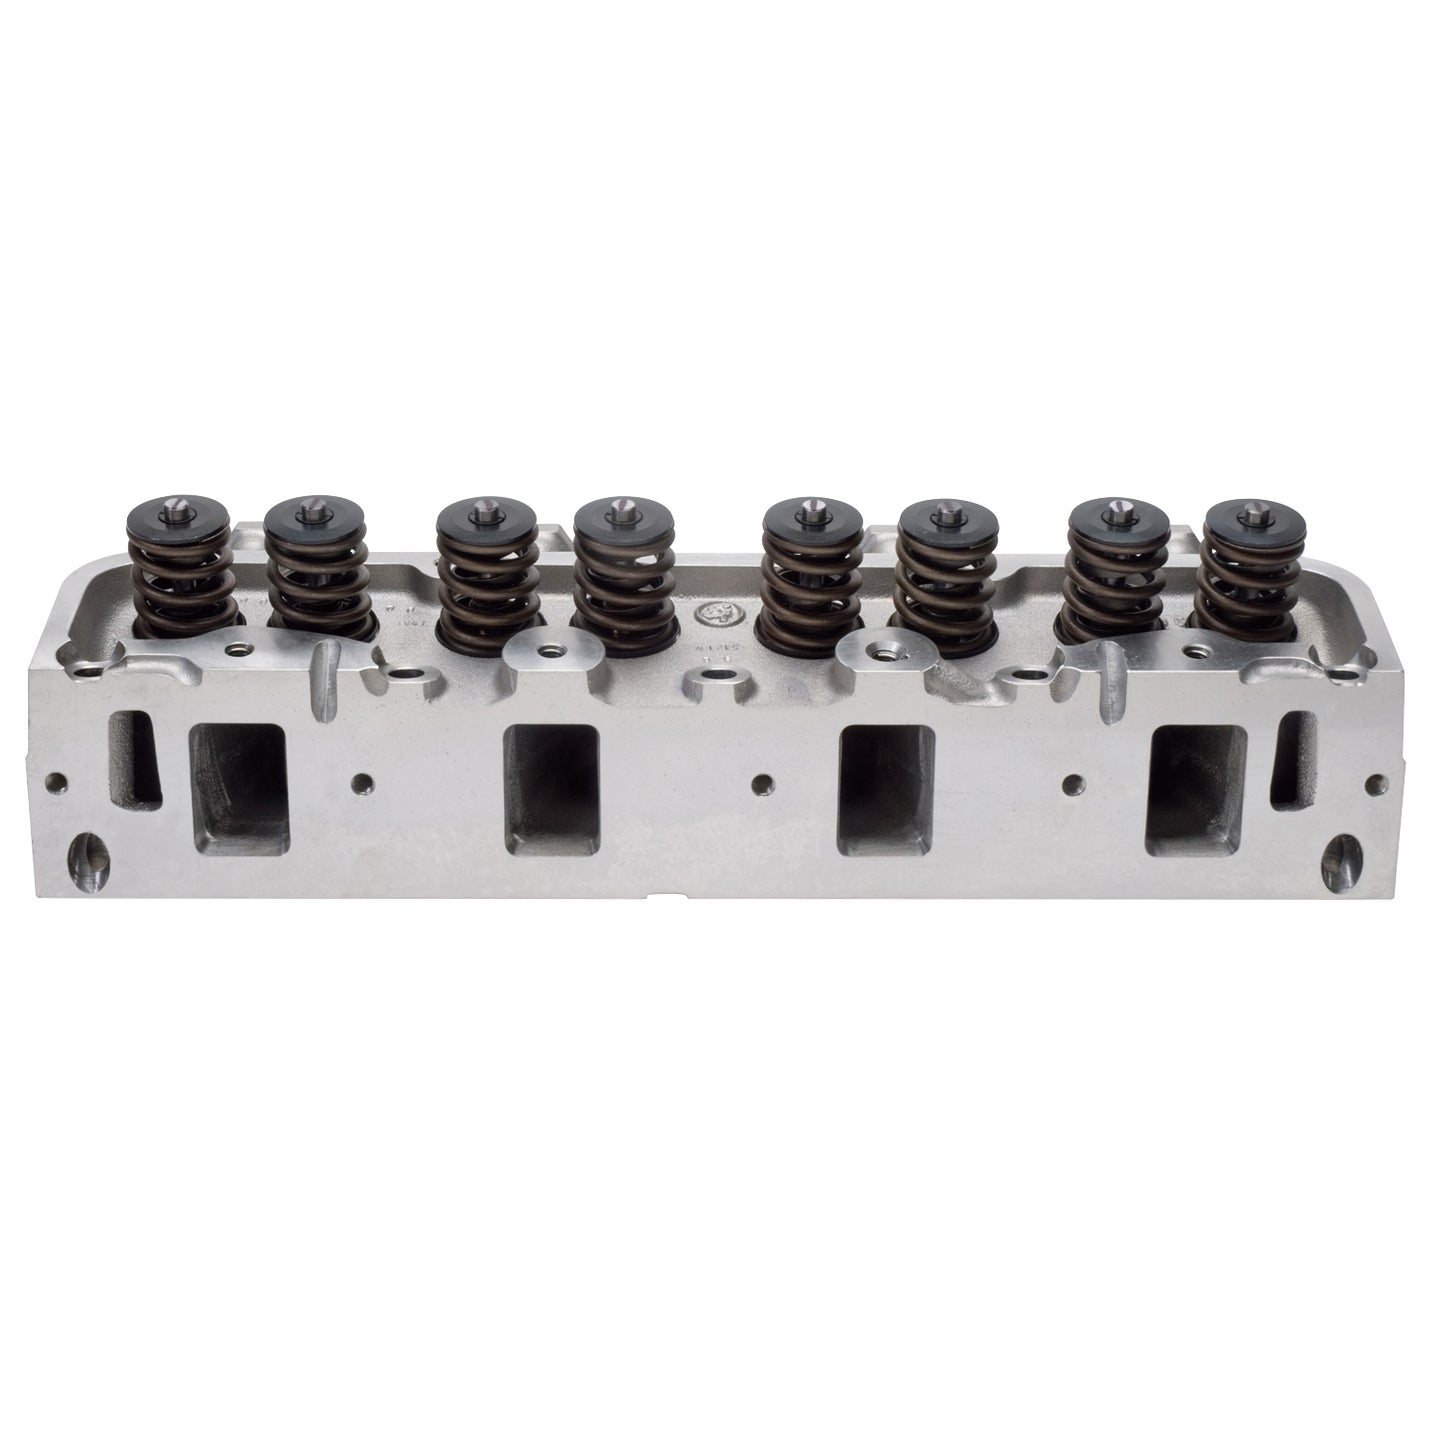 Aluminum Edelbrock Cylinder Head Assembly 60069 Performer RPM 170cc 72cc for Ford 390-428 FE